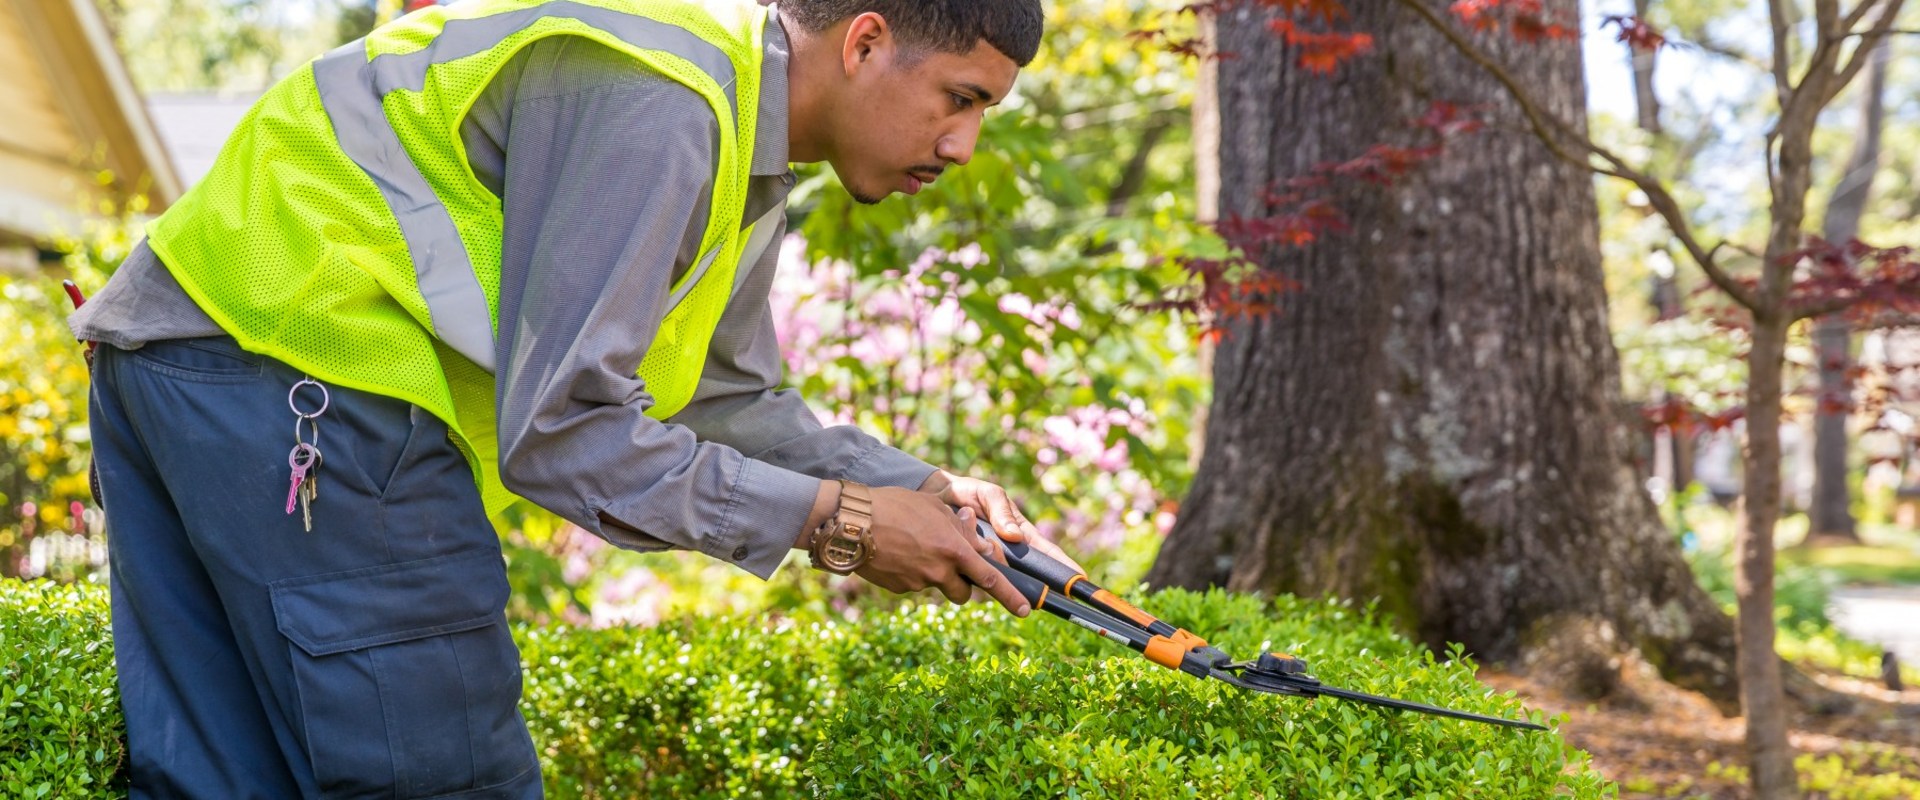 Pruning and Trimming Trees and Shrubs: Essential Tips for Maintaining a Beautiful Landscape